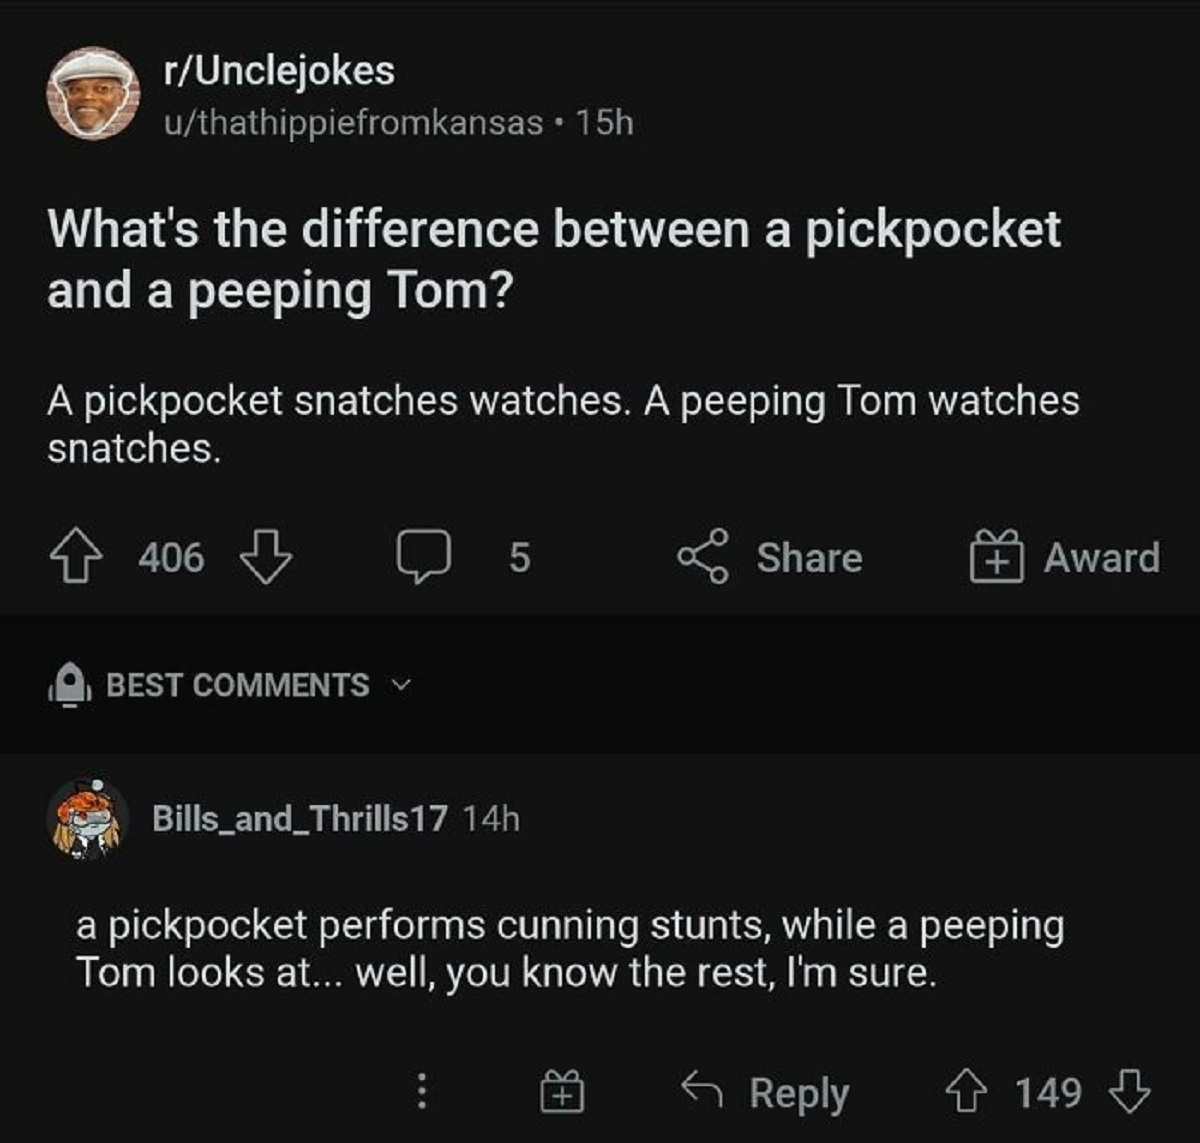 funny replies better than the original - screenshot - rUnclejokes uthathippiefromkansas 15h What's the difference between a pickpocket and a peeping Tom? A pickpocket snatches watches. A peeping Tom watches snatches. 406 Best 5 Bills_and_Thrills17 14h Awa